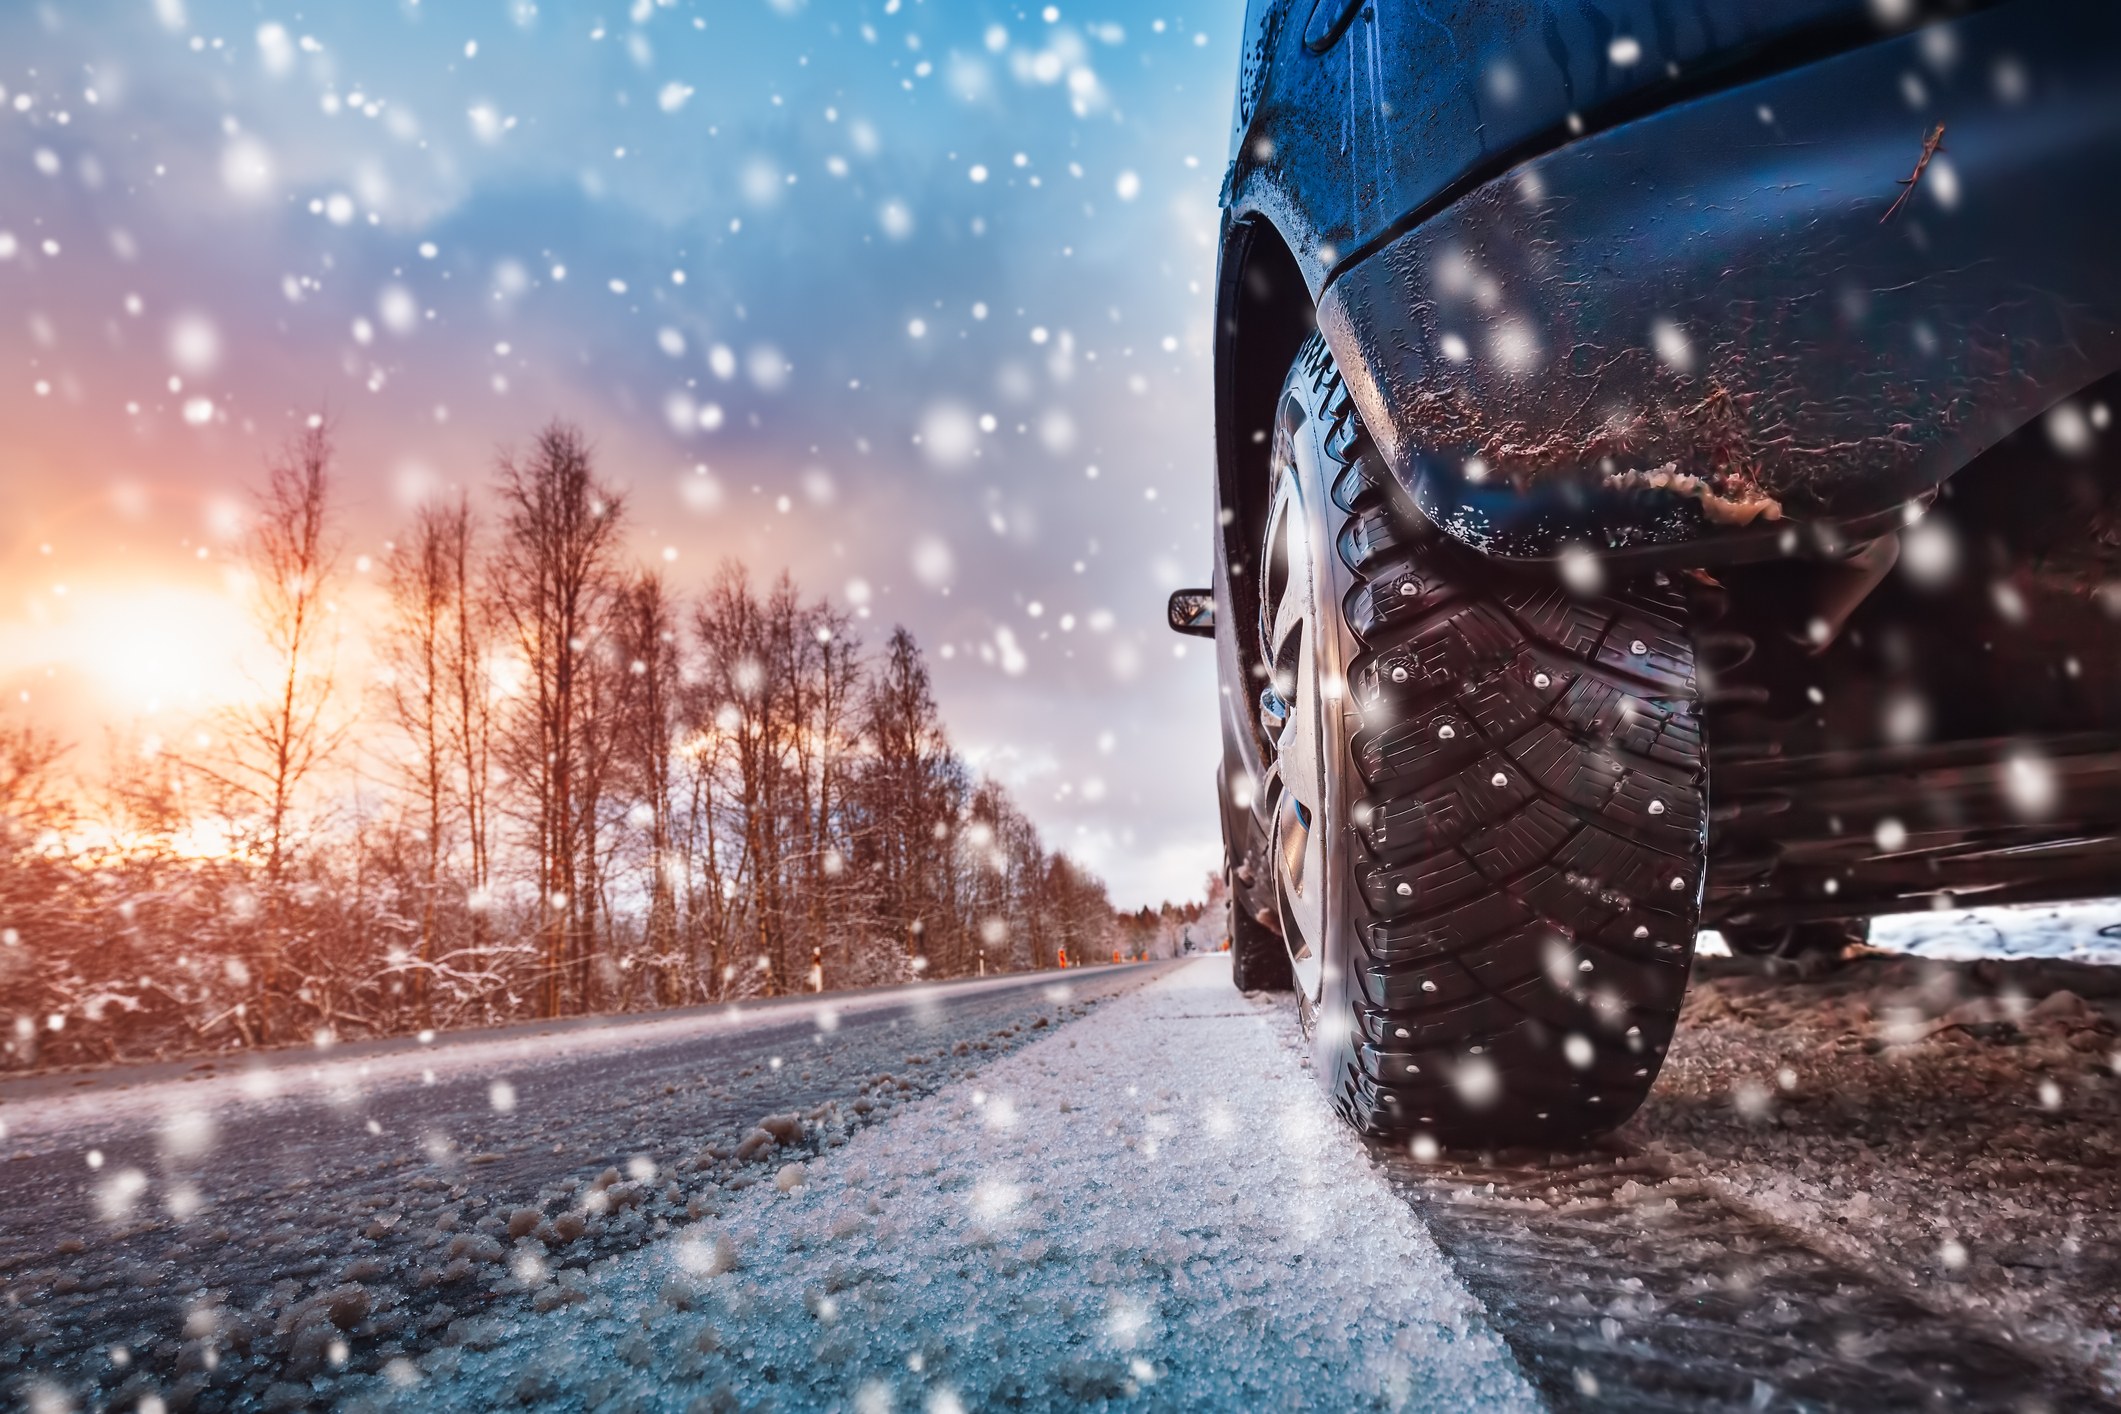 Car tires on winter road covered with snow